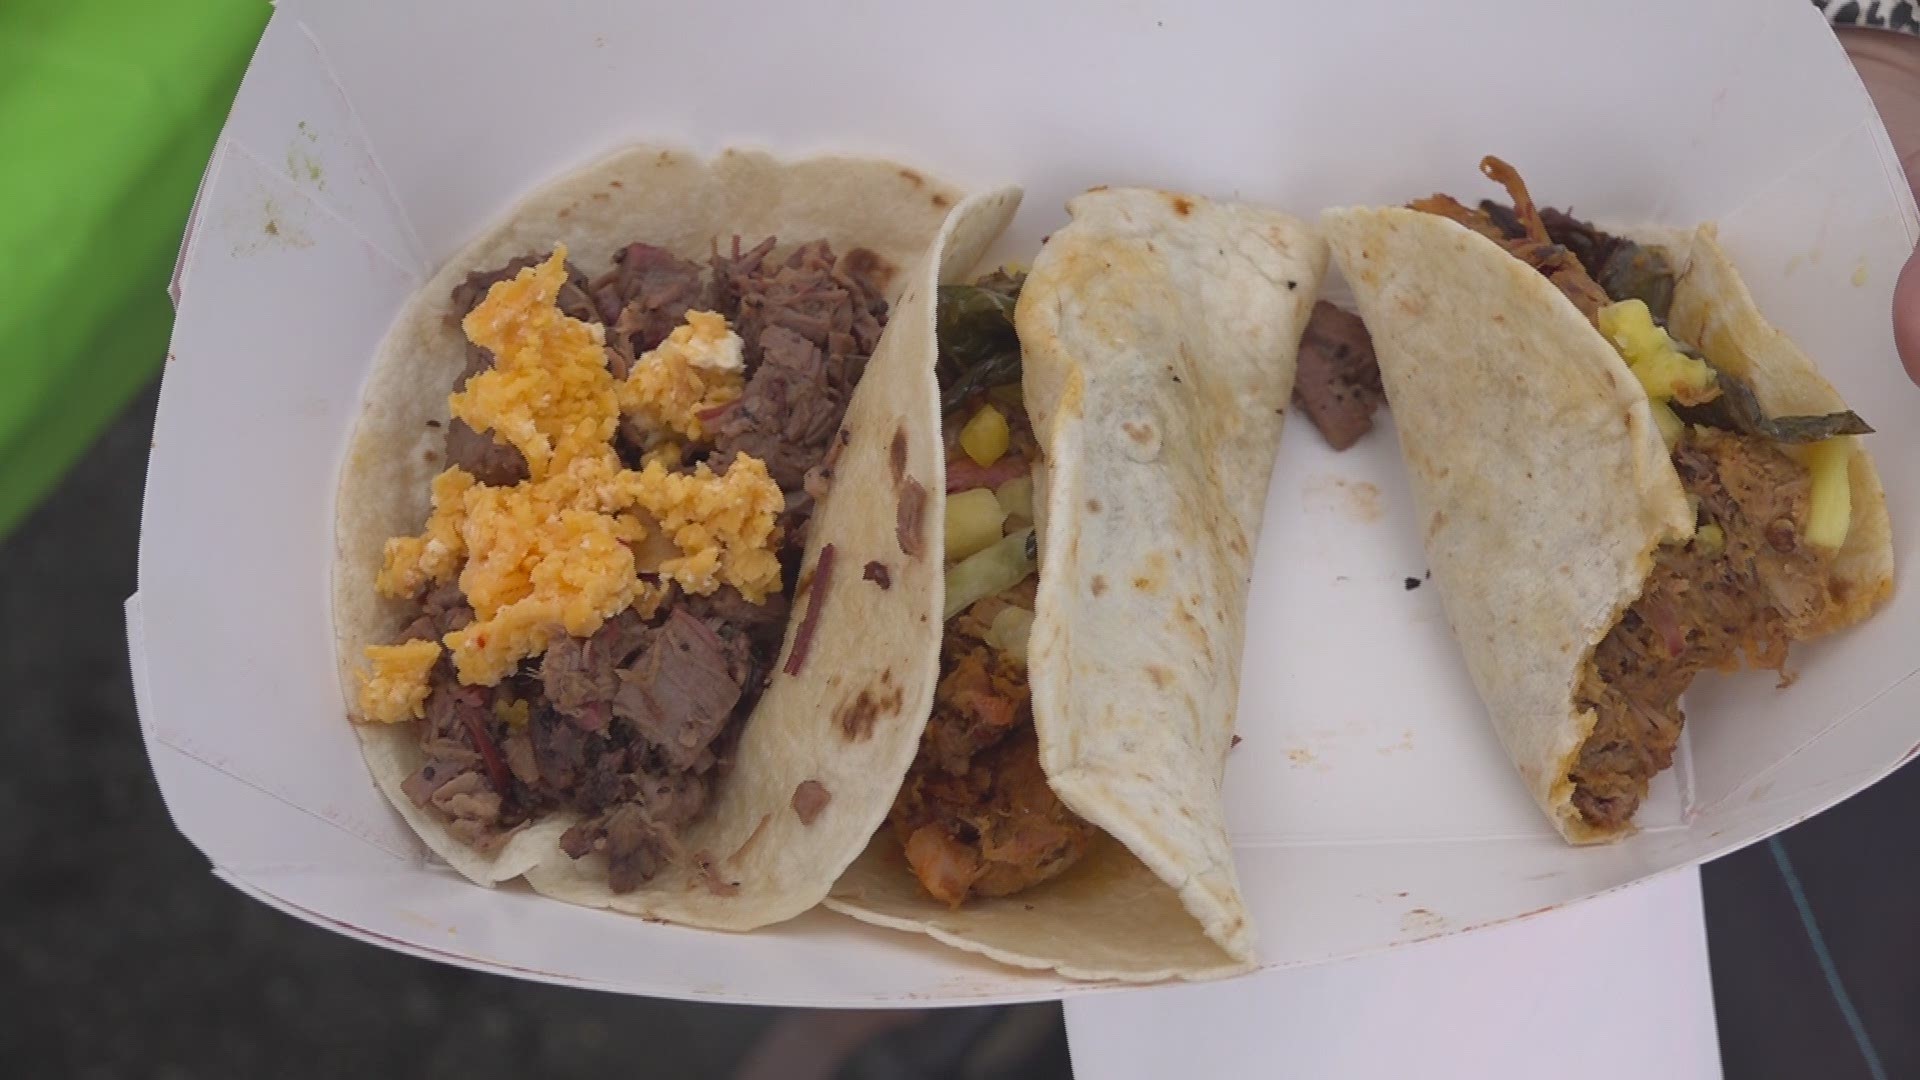 Custom tacos draws large crowd to the square